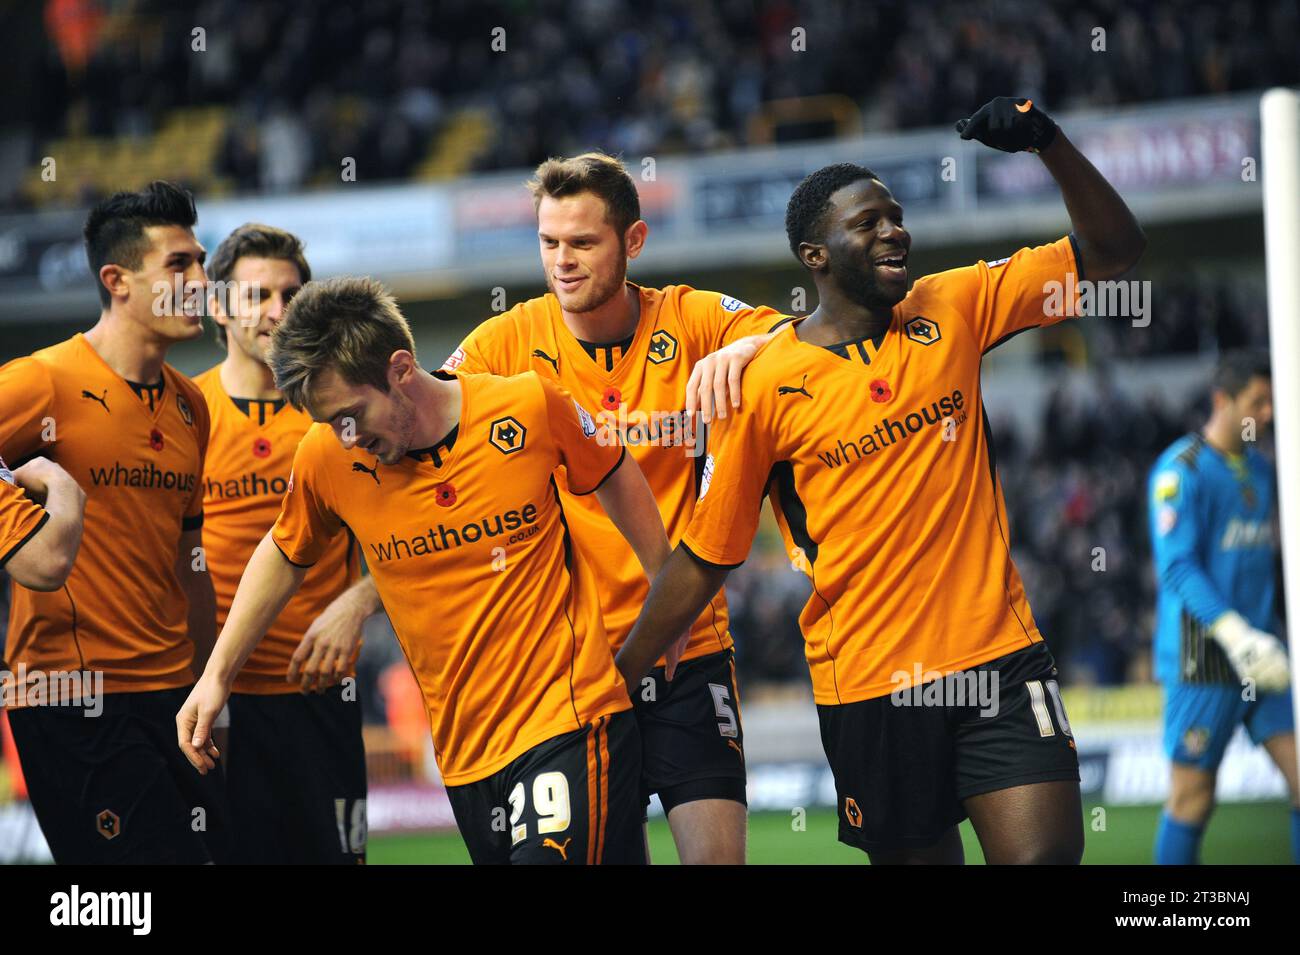 Kevin Doyle of Wolverhampton Wanderers celebrates after scoring a goal to make it 1-0 Sky Bet Football League One -  Wolverhampton Wanderers v Stevenage 02/11/2013 Stock Photo